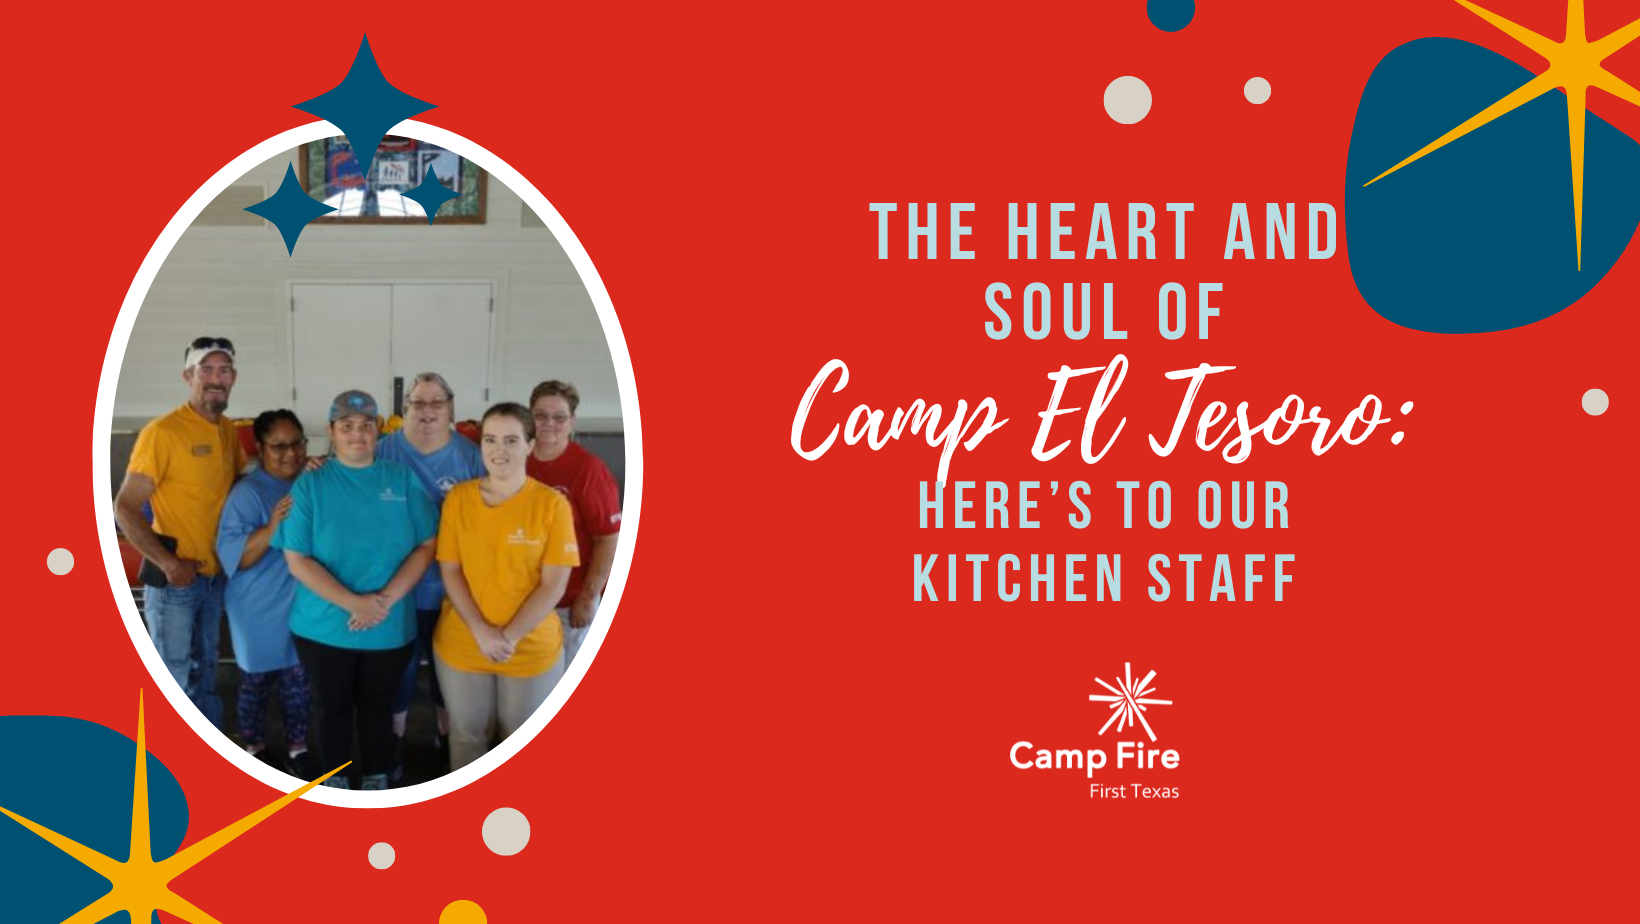 The Heart and Soul of Camp El Tesoro: Here’s to Our Kitchen Staff, a Camp Fire First Texas blog